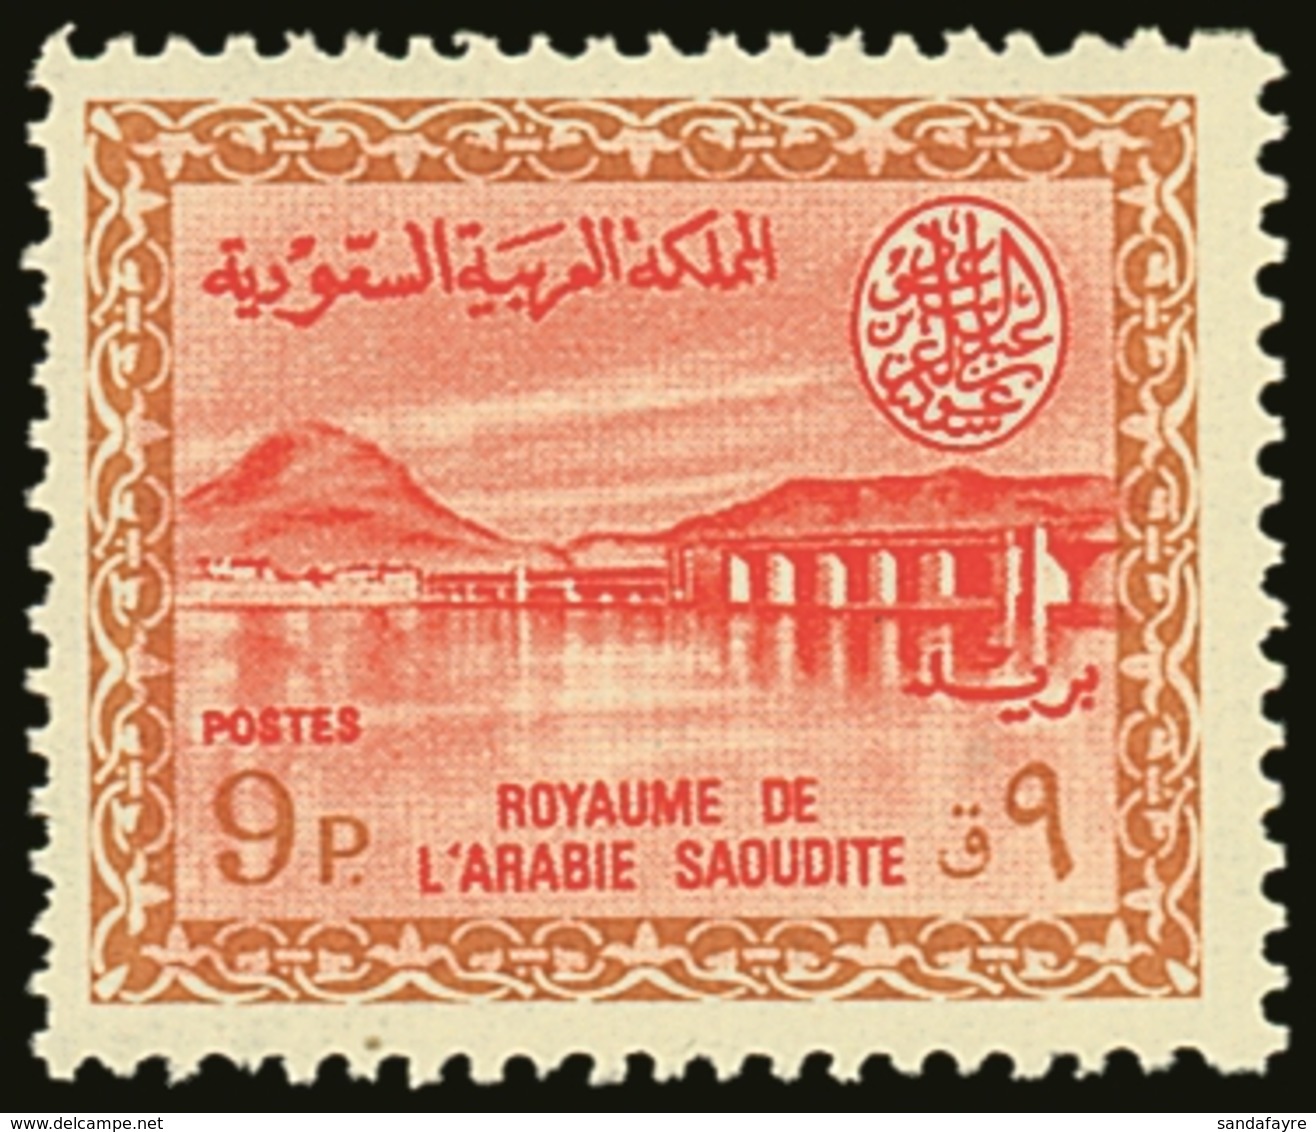 1964-72  9p Vermilion And Yellow-brown Wadi Hanifa Dam Definitive, SG 565, Never Hinged Mint. For More Images, Please Vi - Saoedi-Arabië